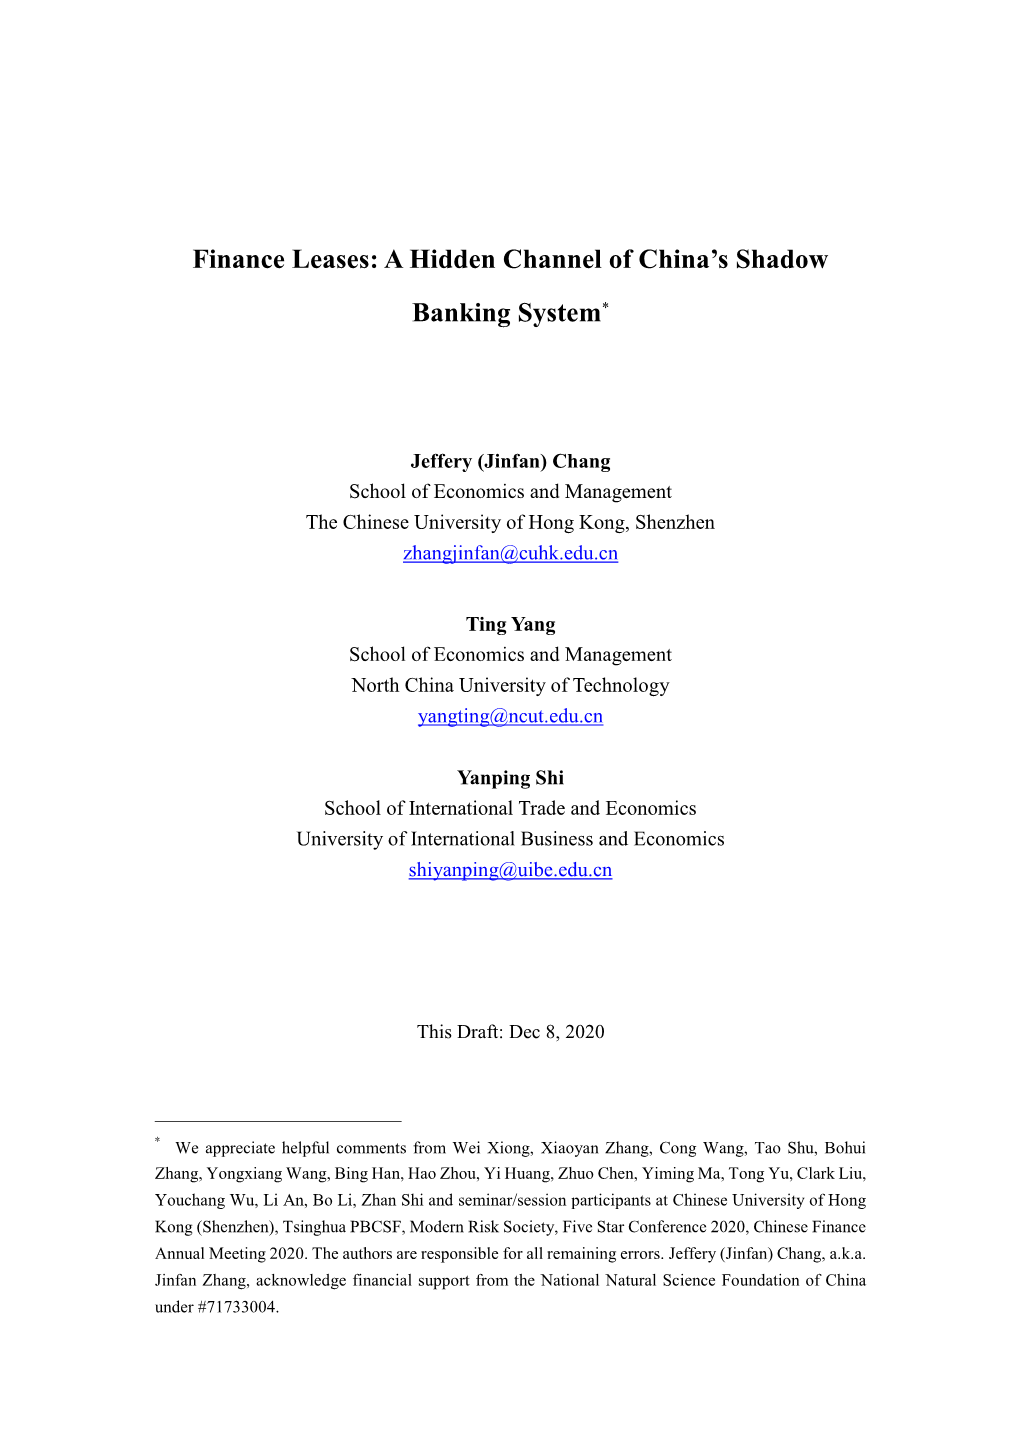 Finance Leases: a Hidden Channel of China's Shadow Banking